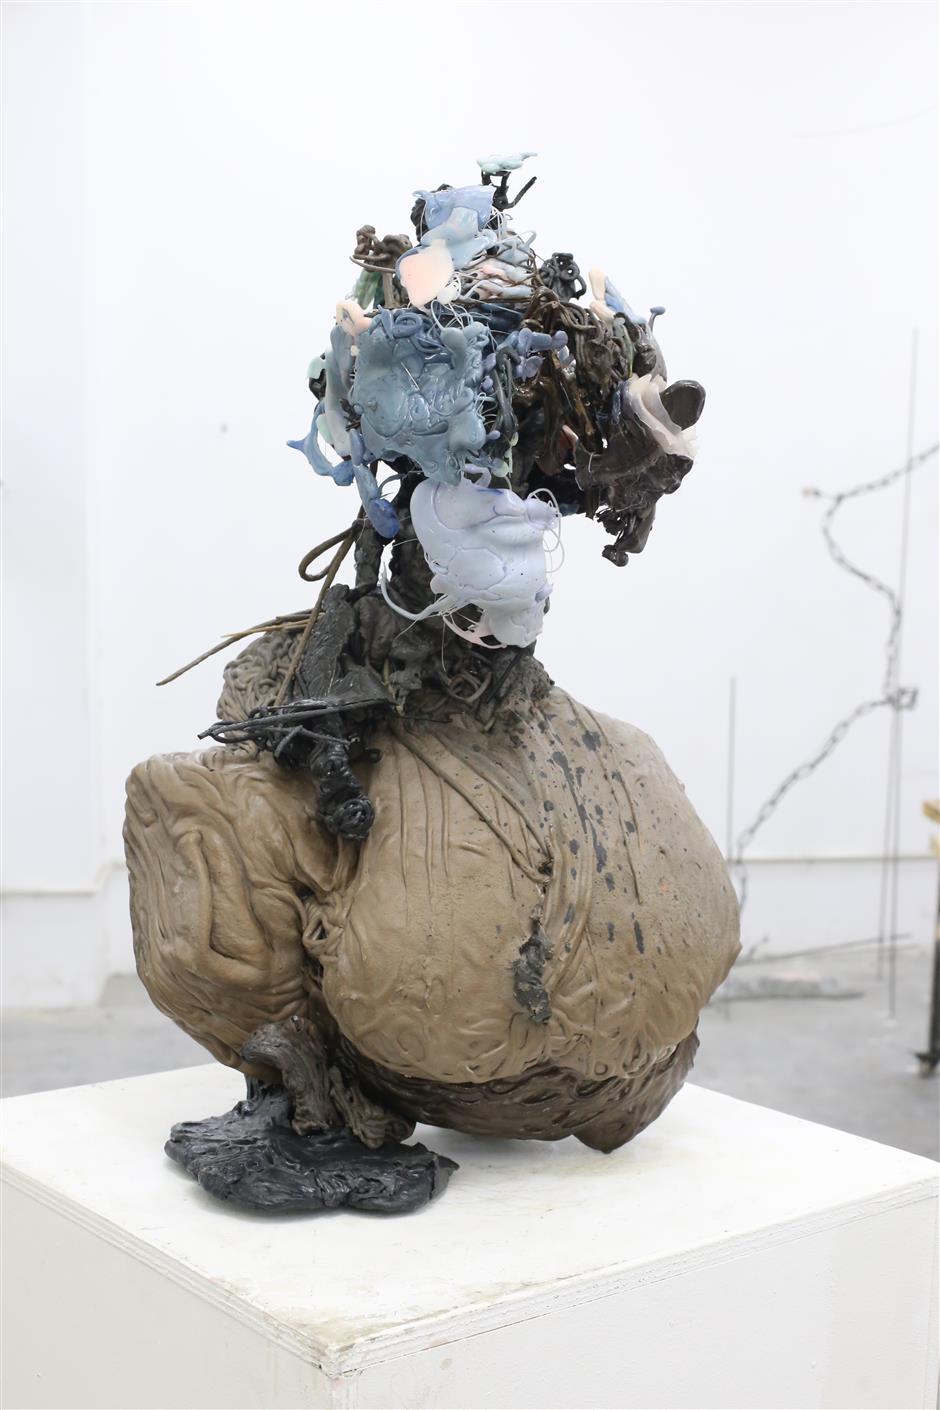 Six artists resort to joint exhibition in Shanghai